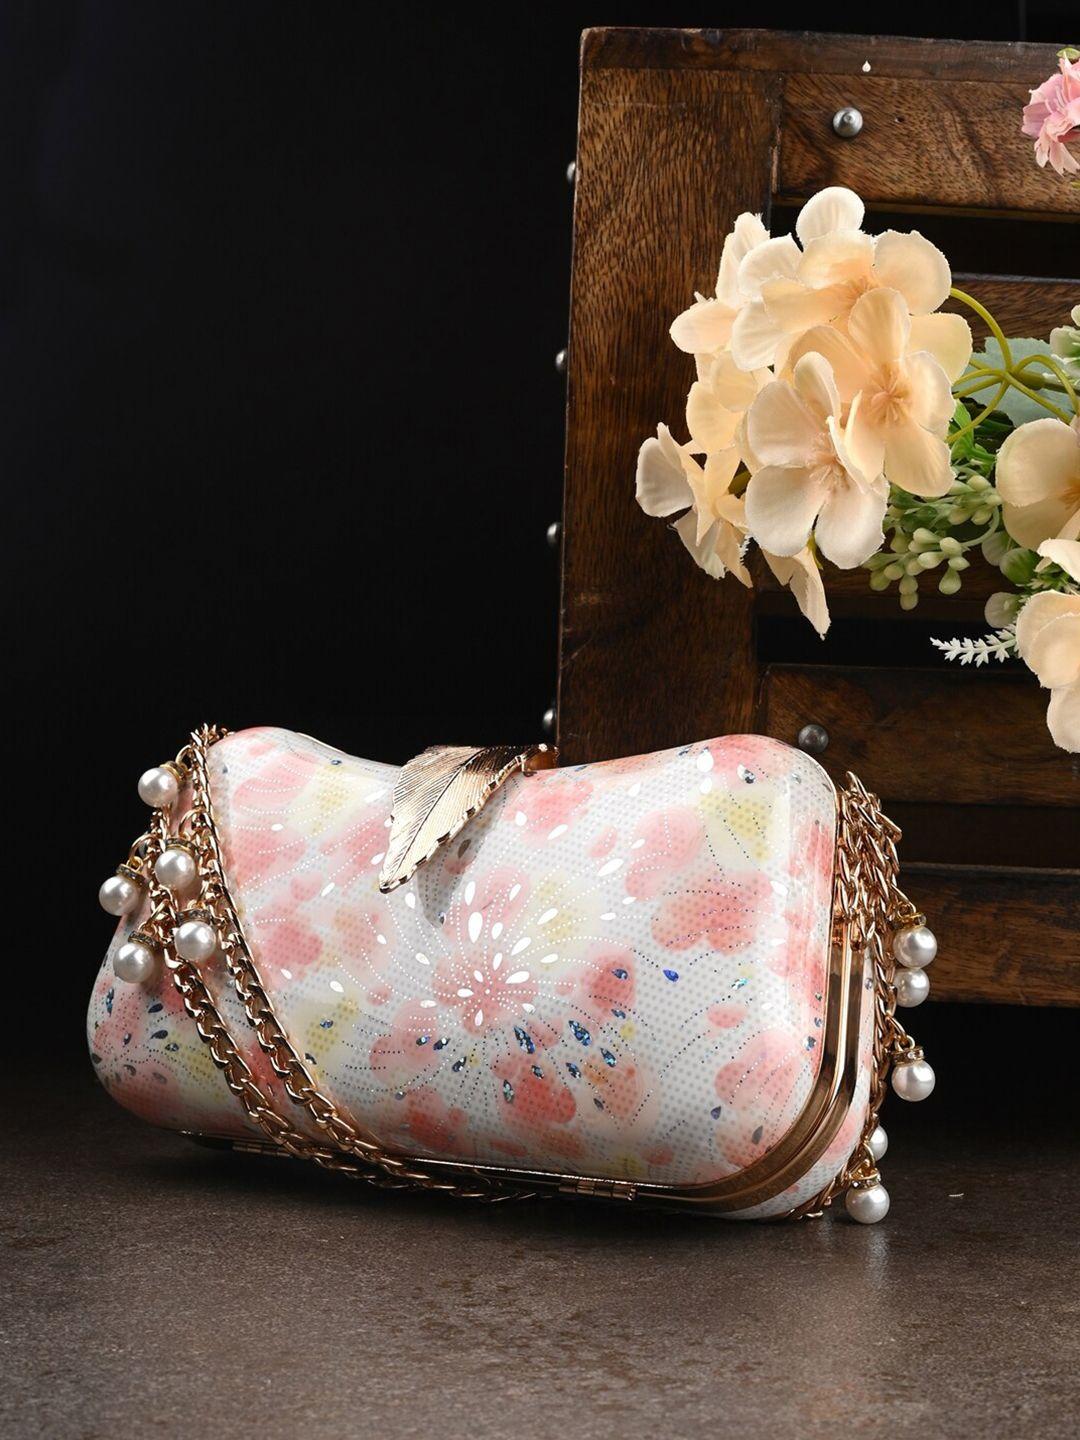 toobacraft white & pink embellished box clutch